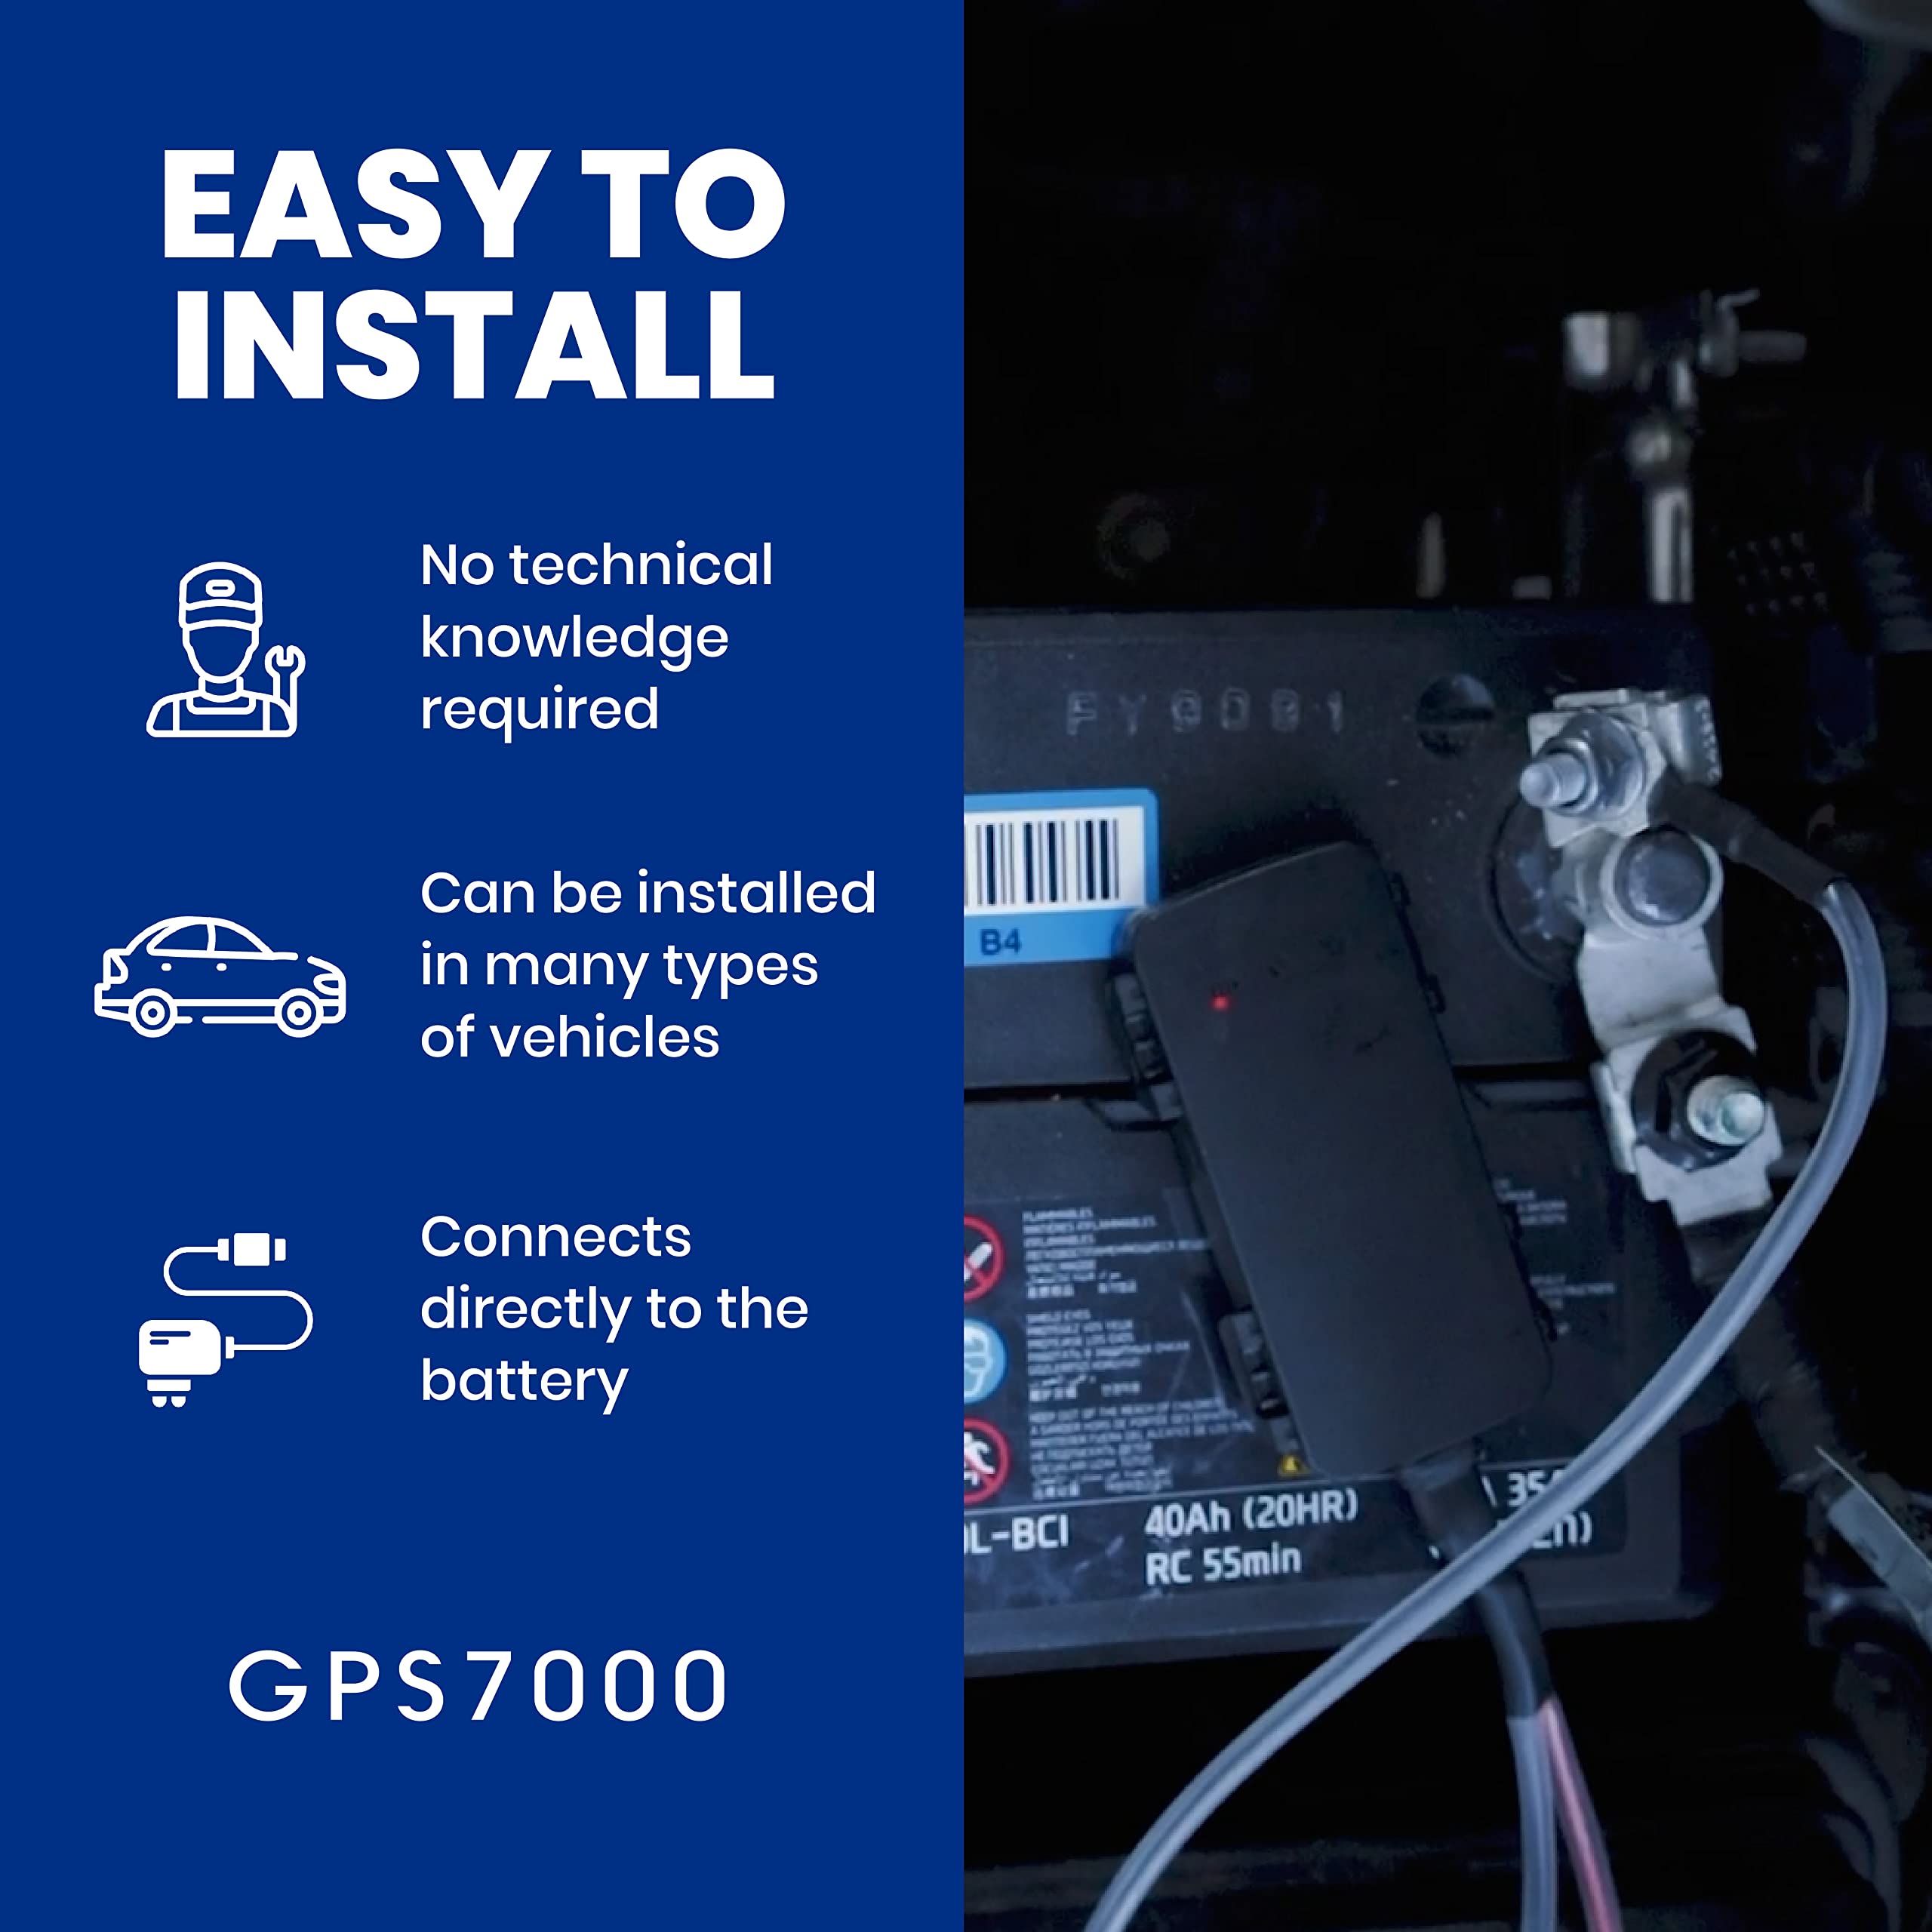 GPS7000 G1-4G LTE Fleet Management Device with Easy Installation. Launch Offer and 10-Day Free Trial